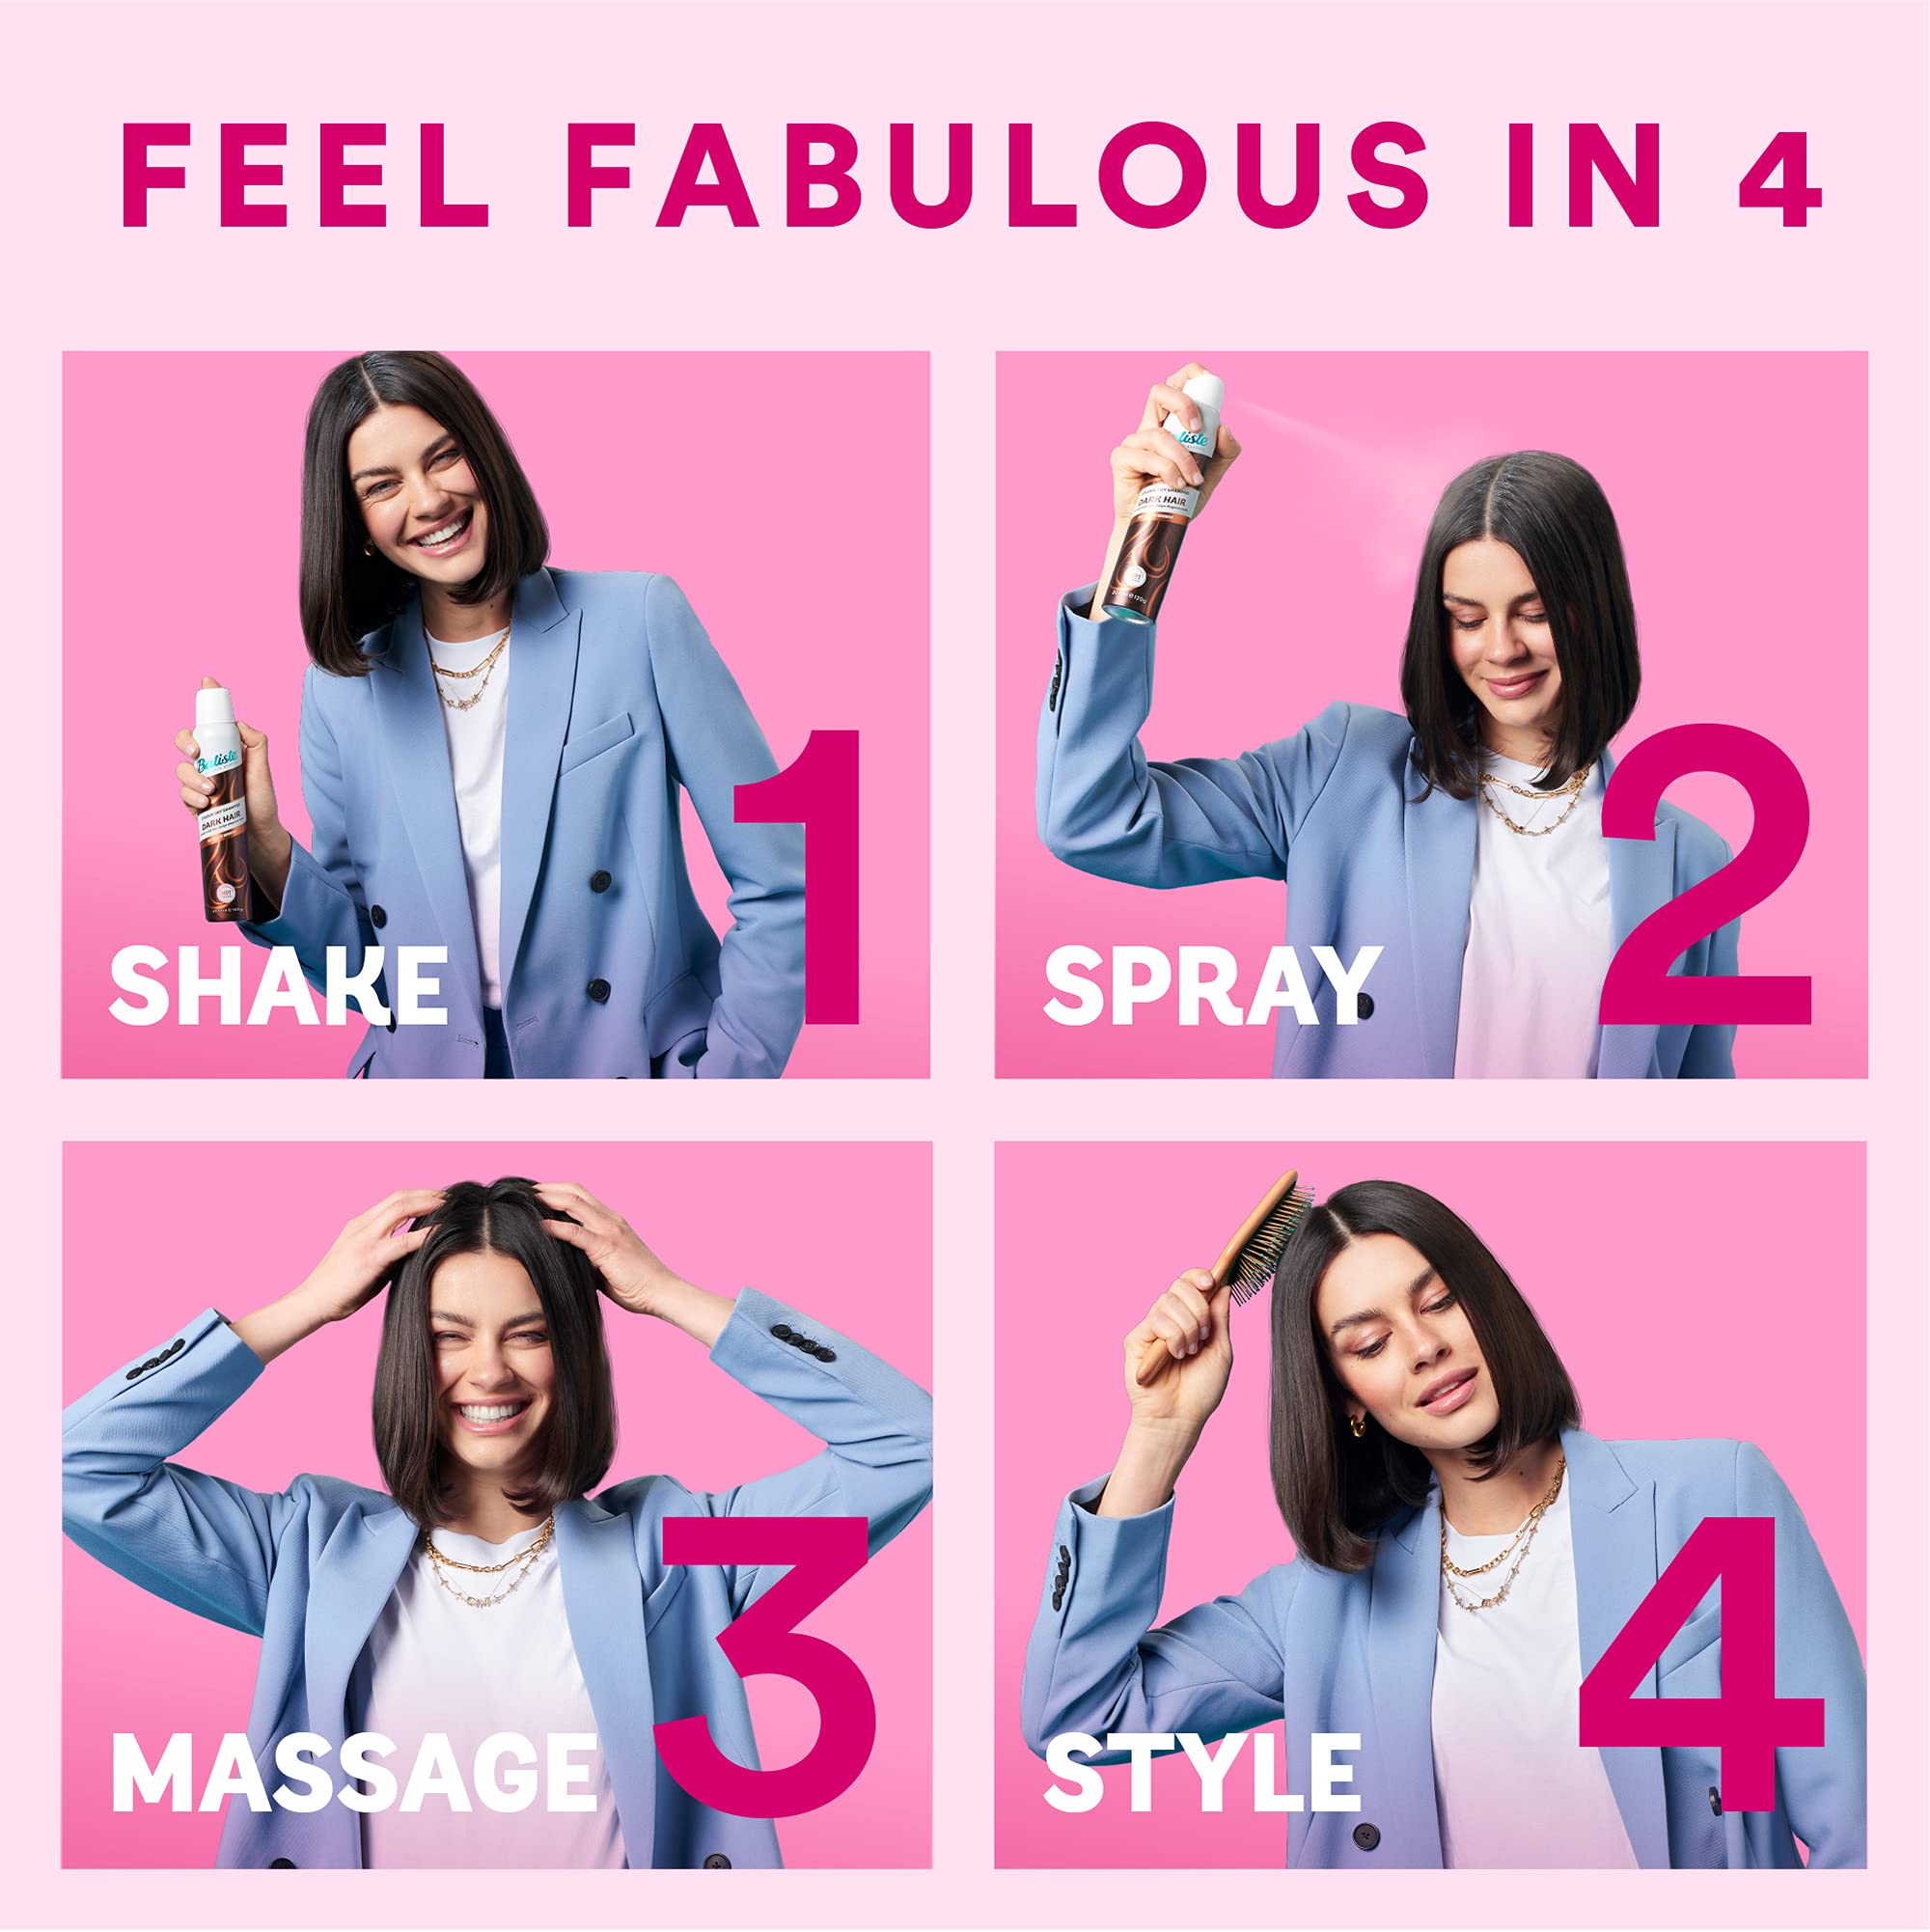 Batiste Dry Shampoo in Divine Dark with a Hint of Colour 350ml, Designed for Brunettes, No Rinse Spray to Refresh Hair in Between Washes, No White Residue for Dark Hair